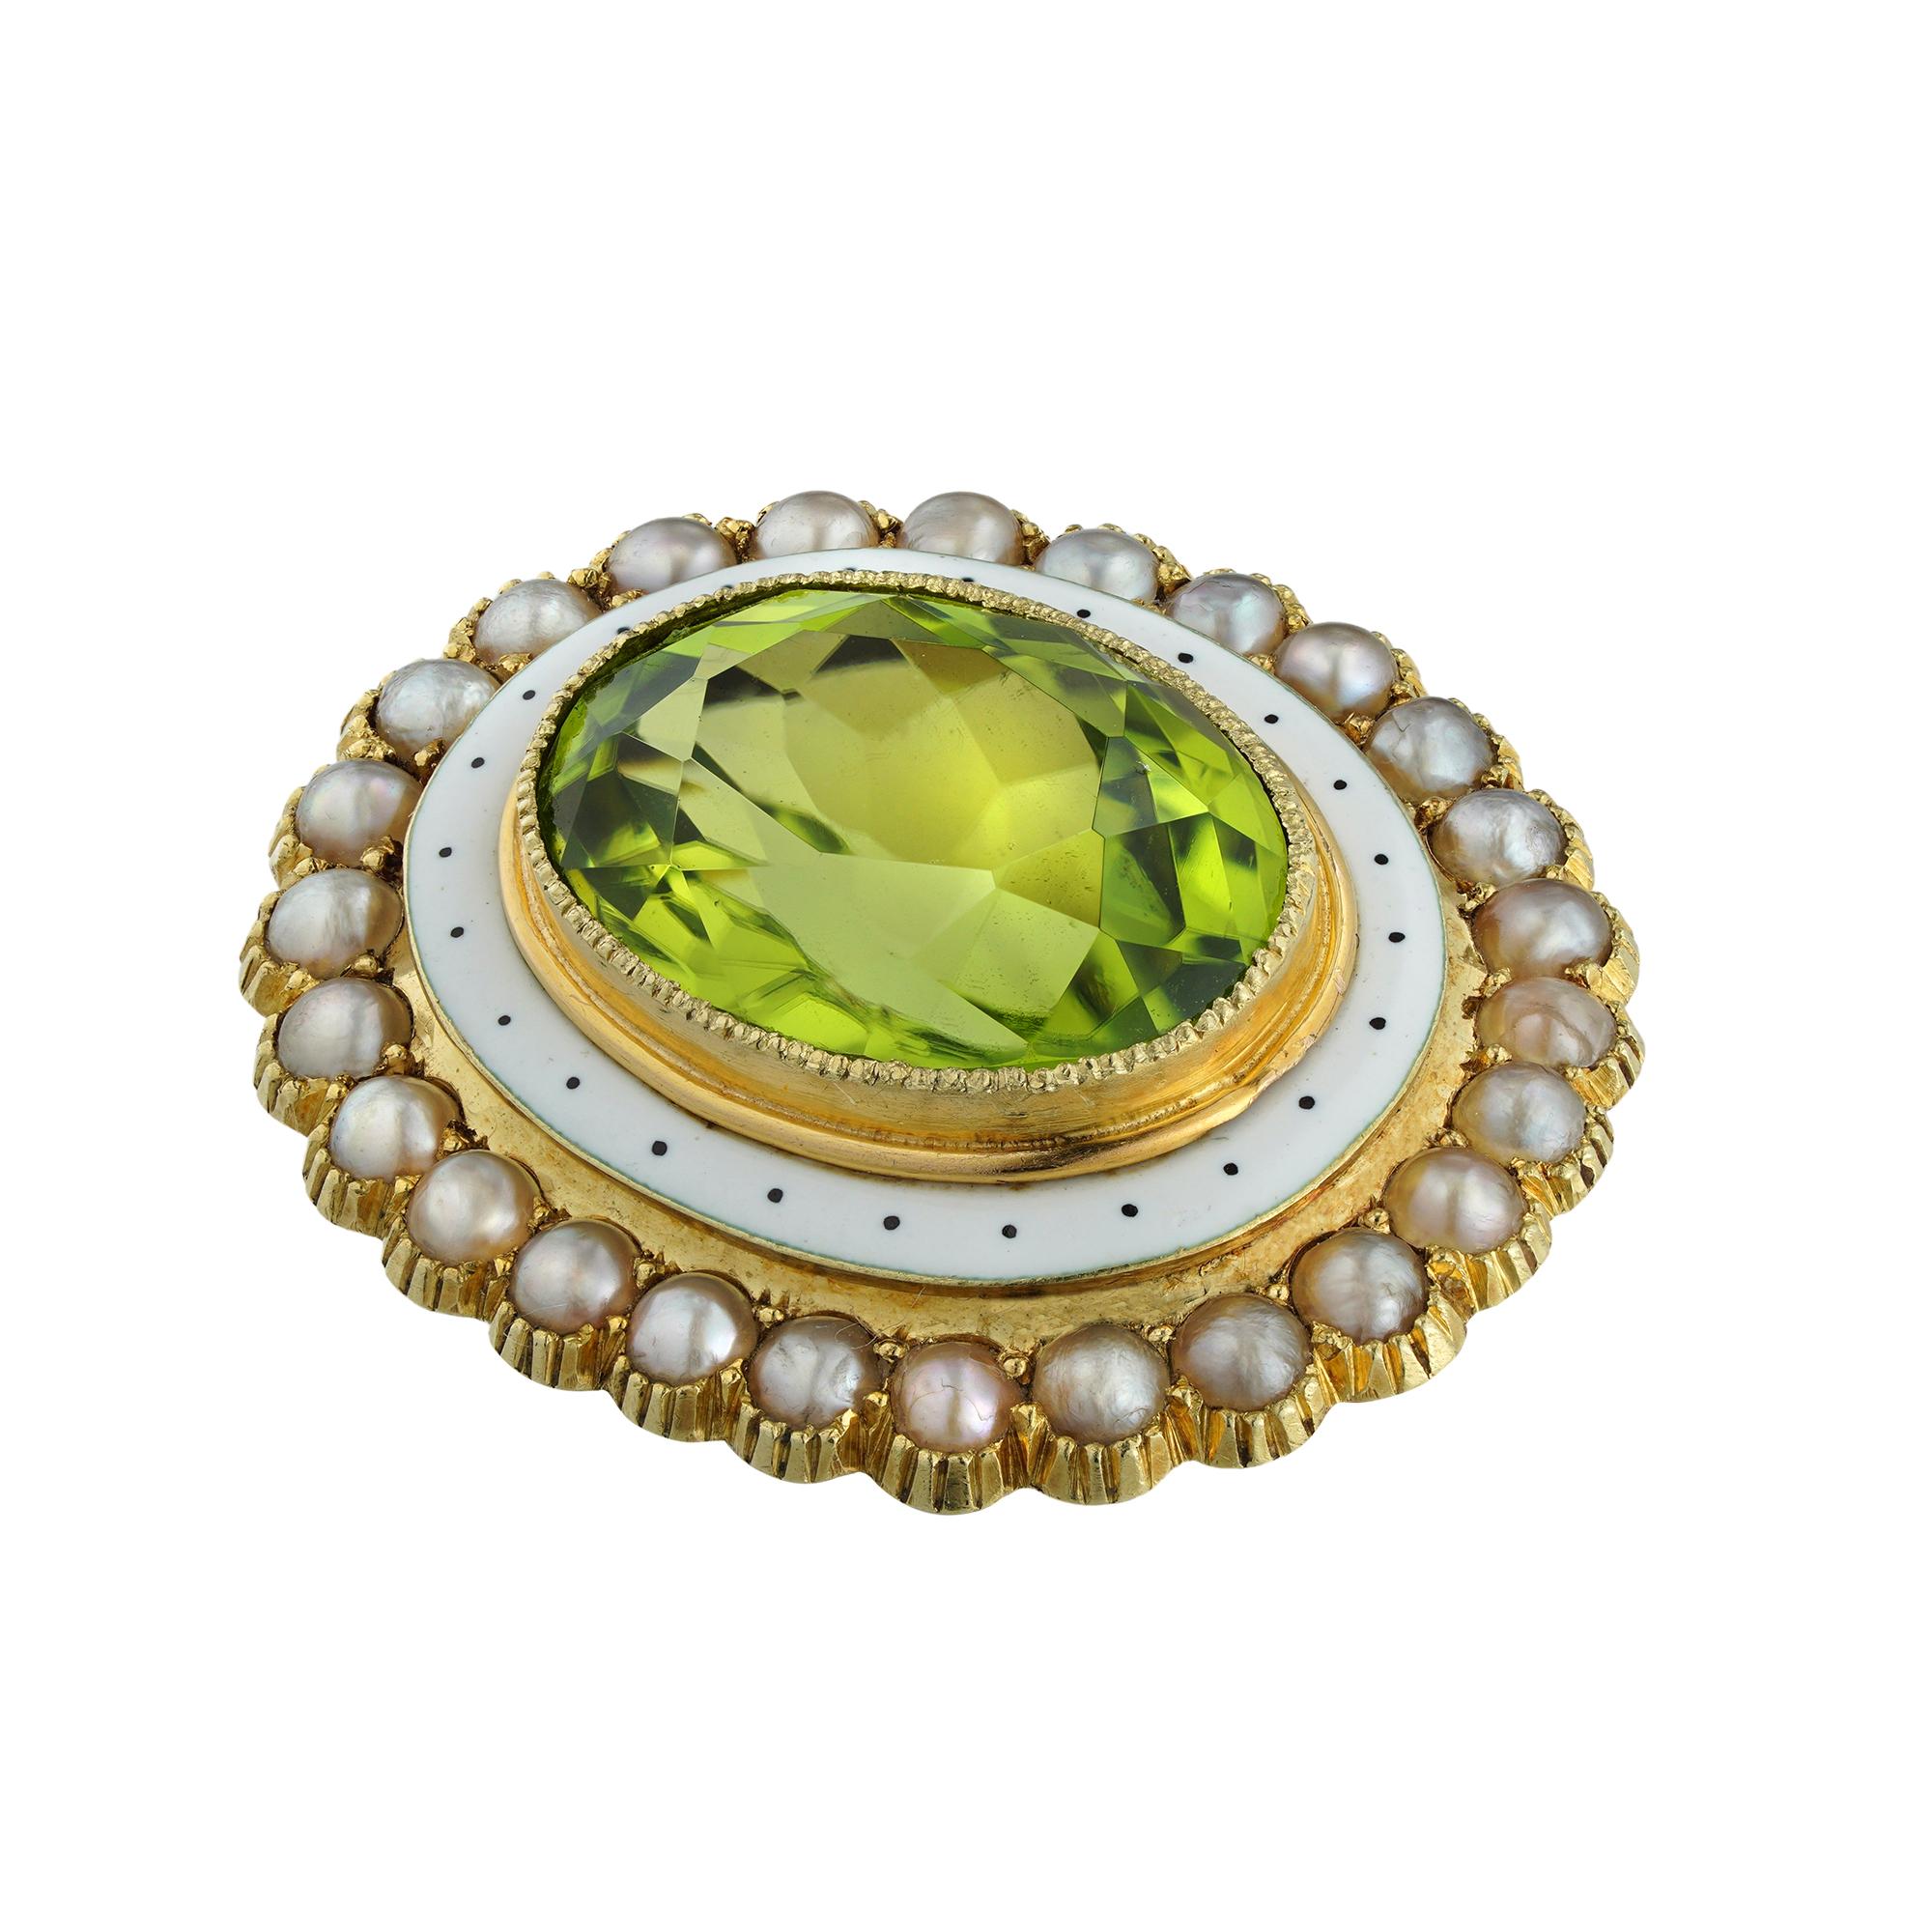 An Edwardian peridot, pearl and enamel brooch, the oval-cut peridot, estimated to weigh 4.75 carats, surrounded by concentric borders of white enamel and half-pearls, all set in yellow gold, with gold brooch fitting, marked 15ct, circa 1900,